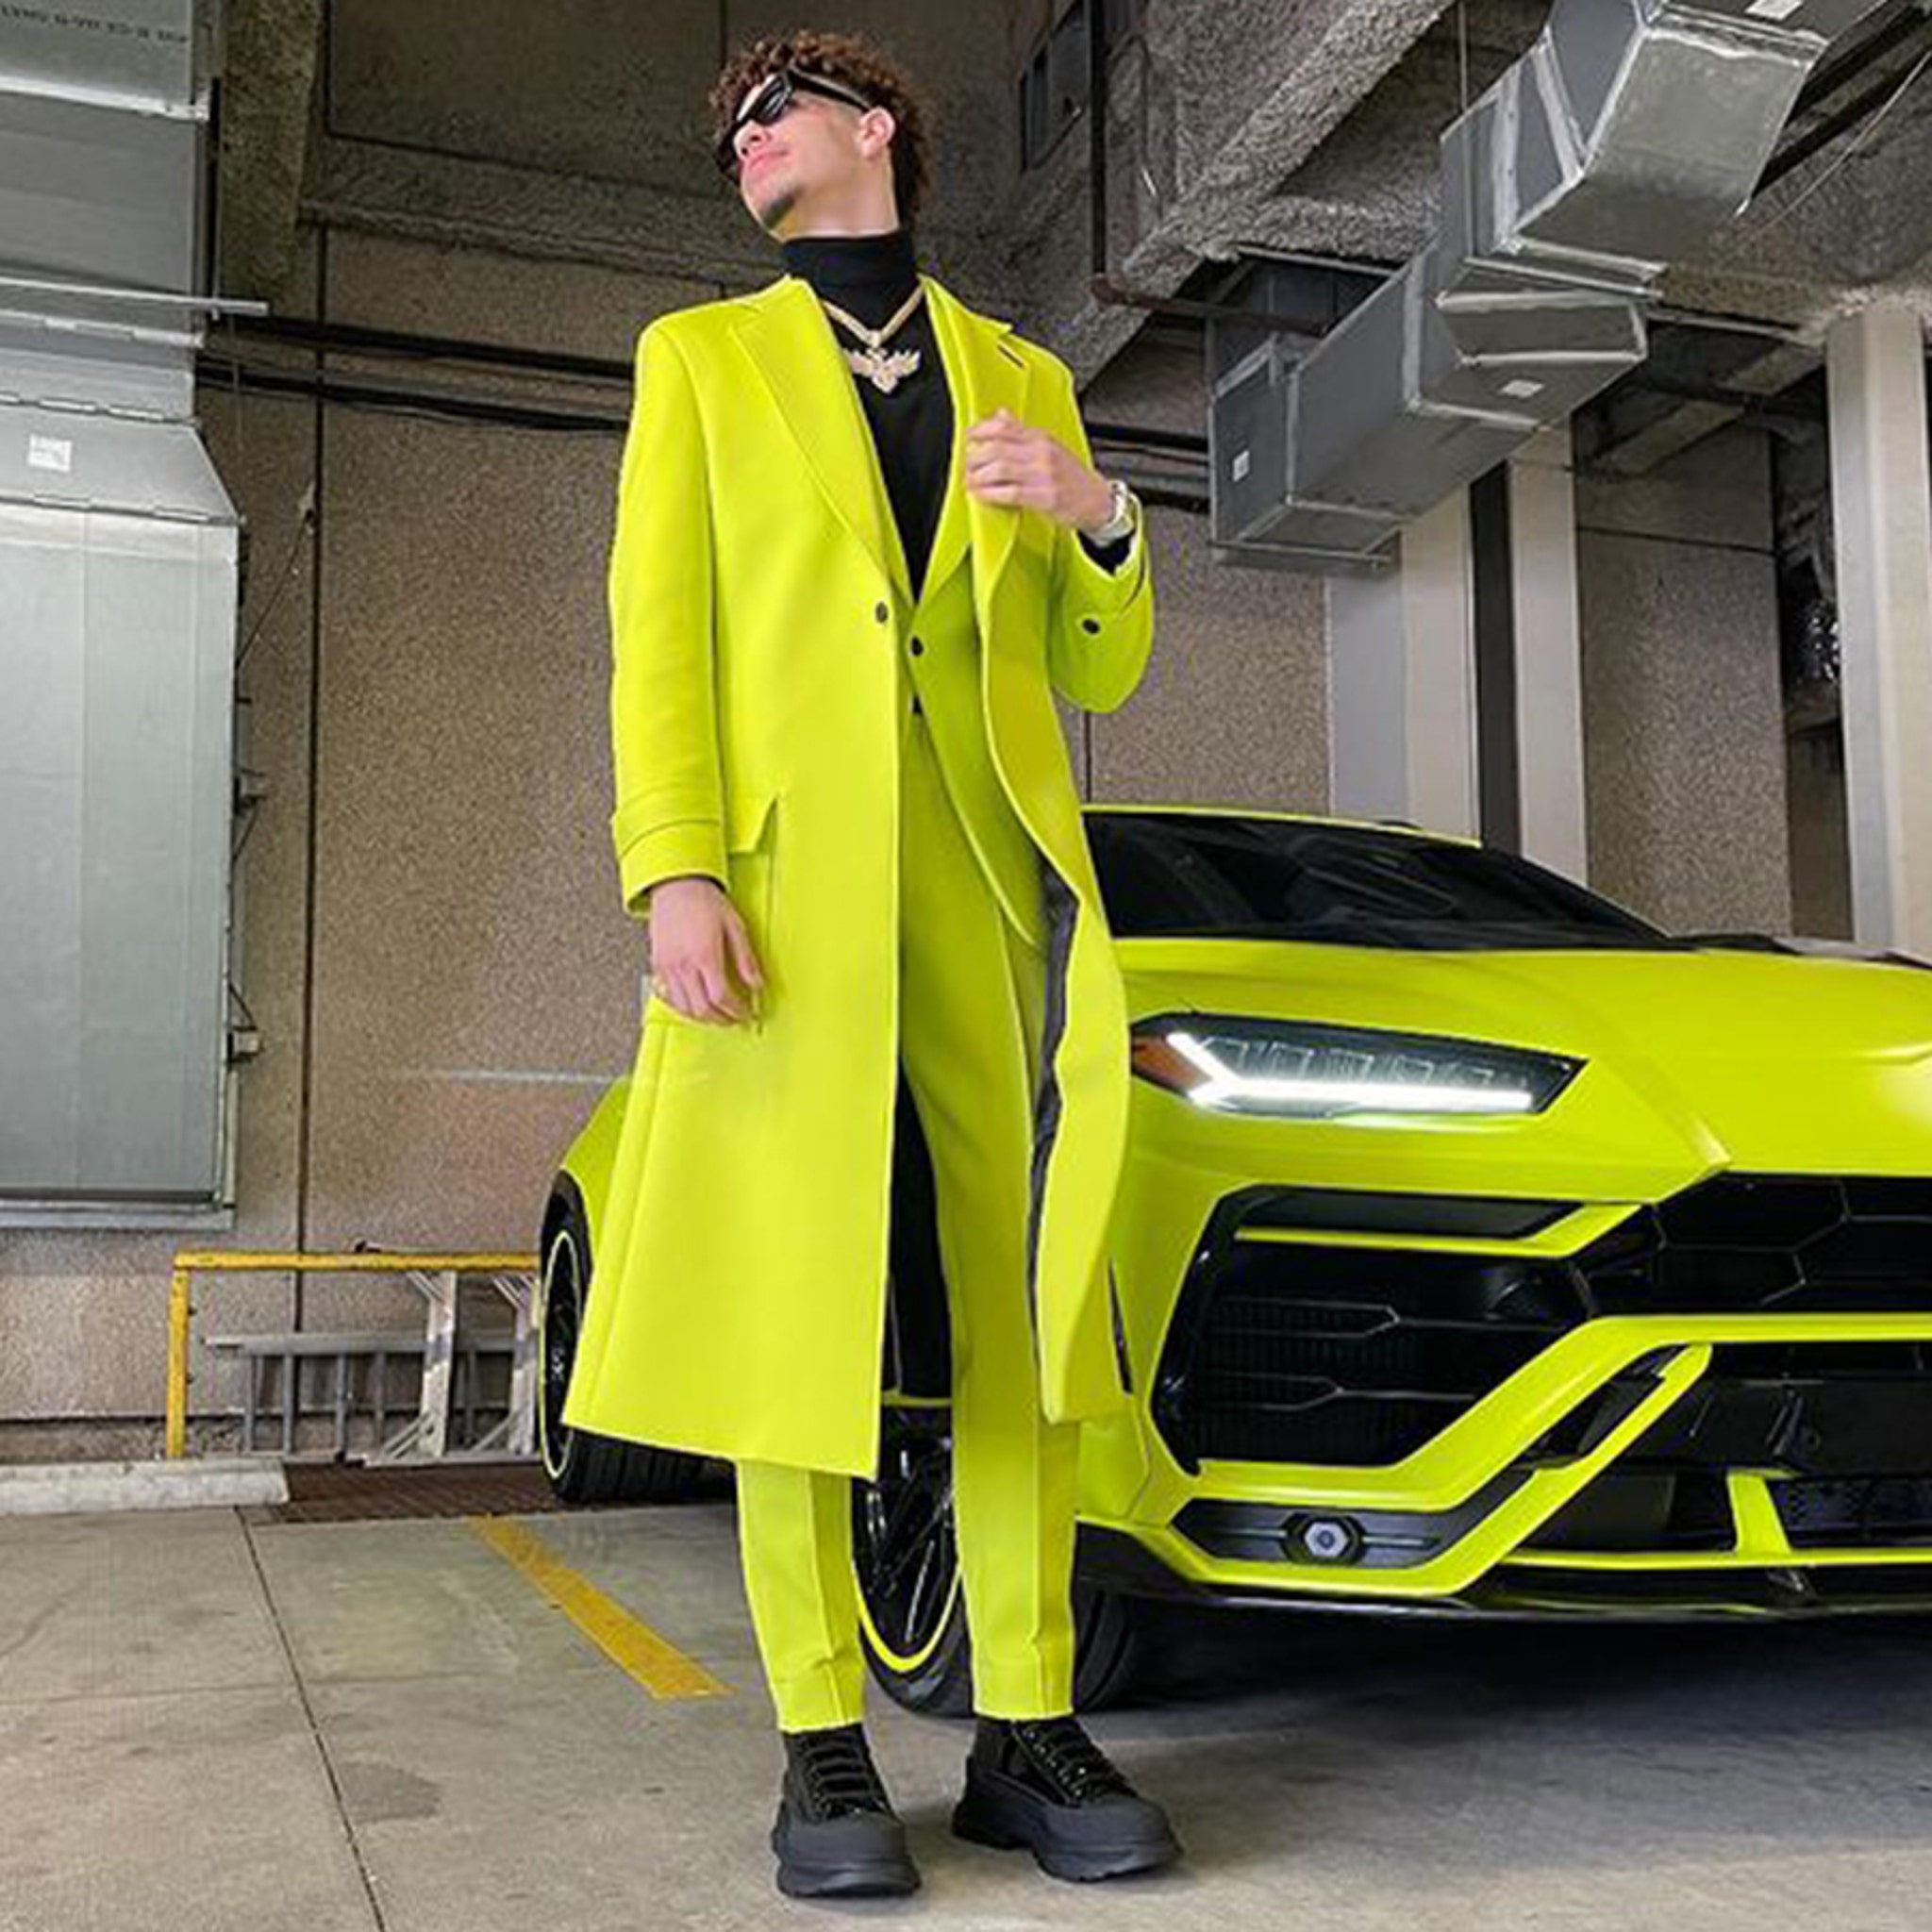 LaMelo Ball Matches Neon Suit With Lambo After Big Game